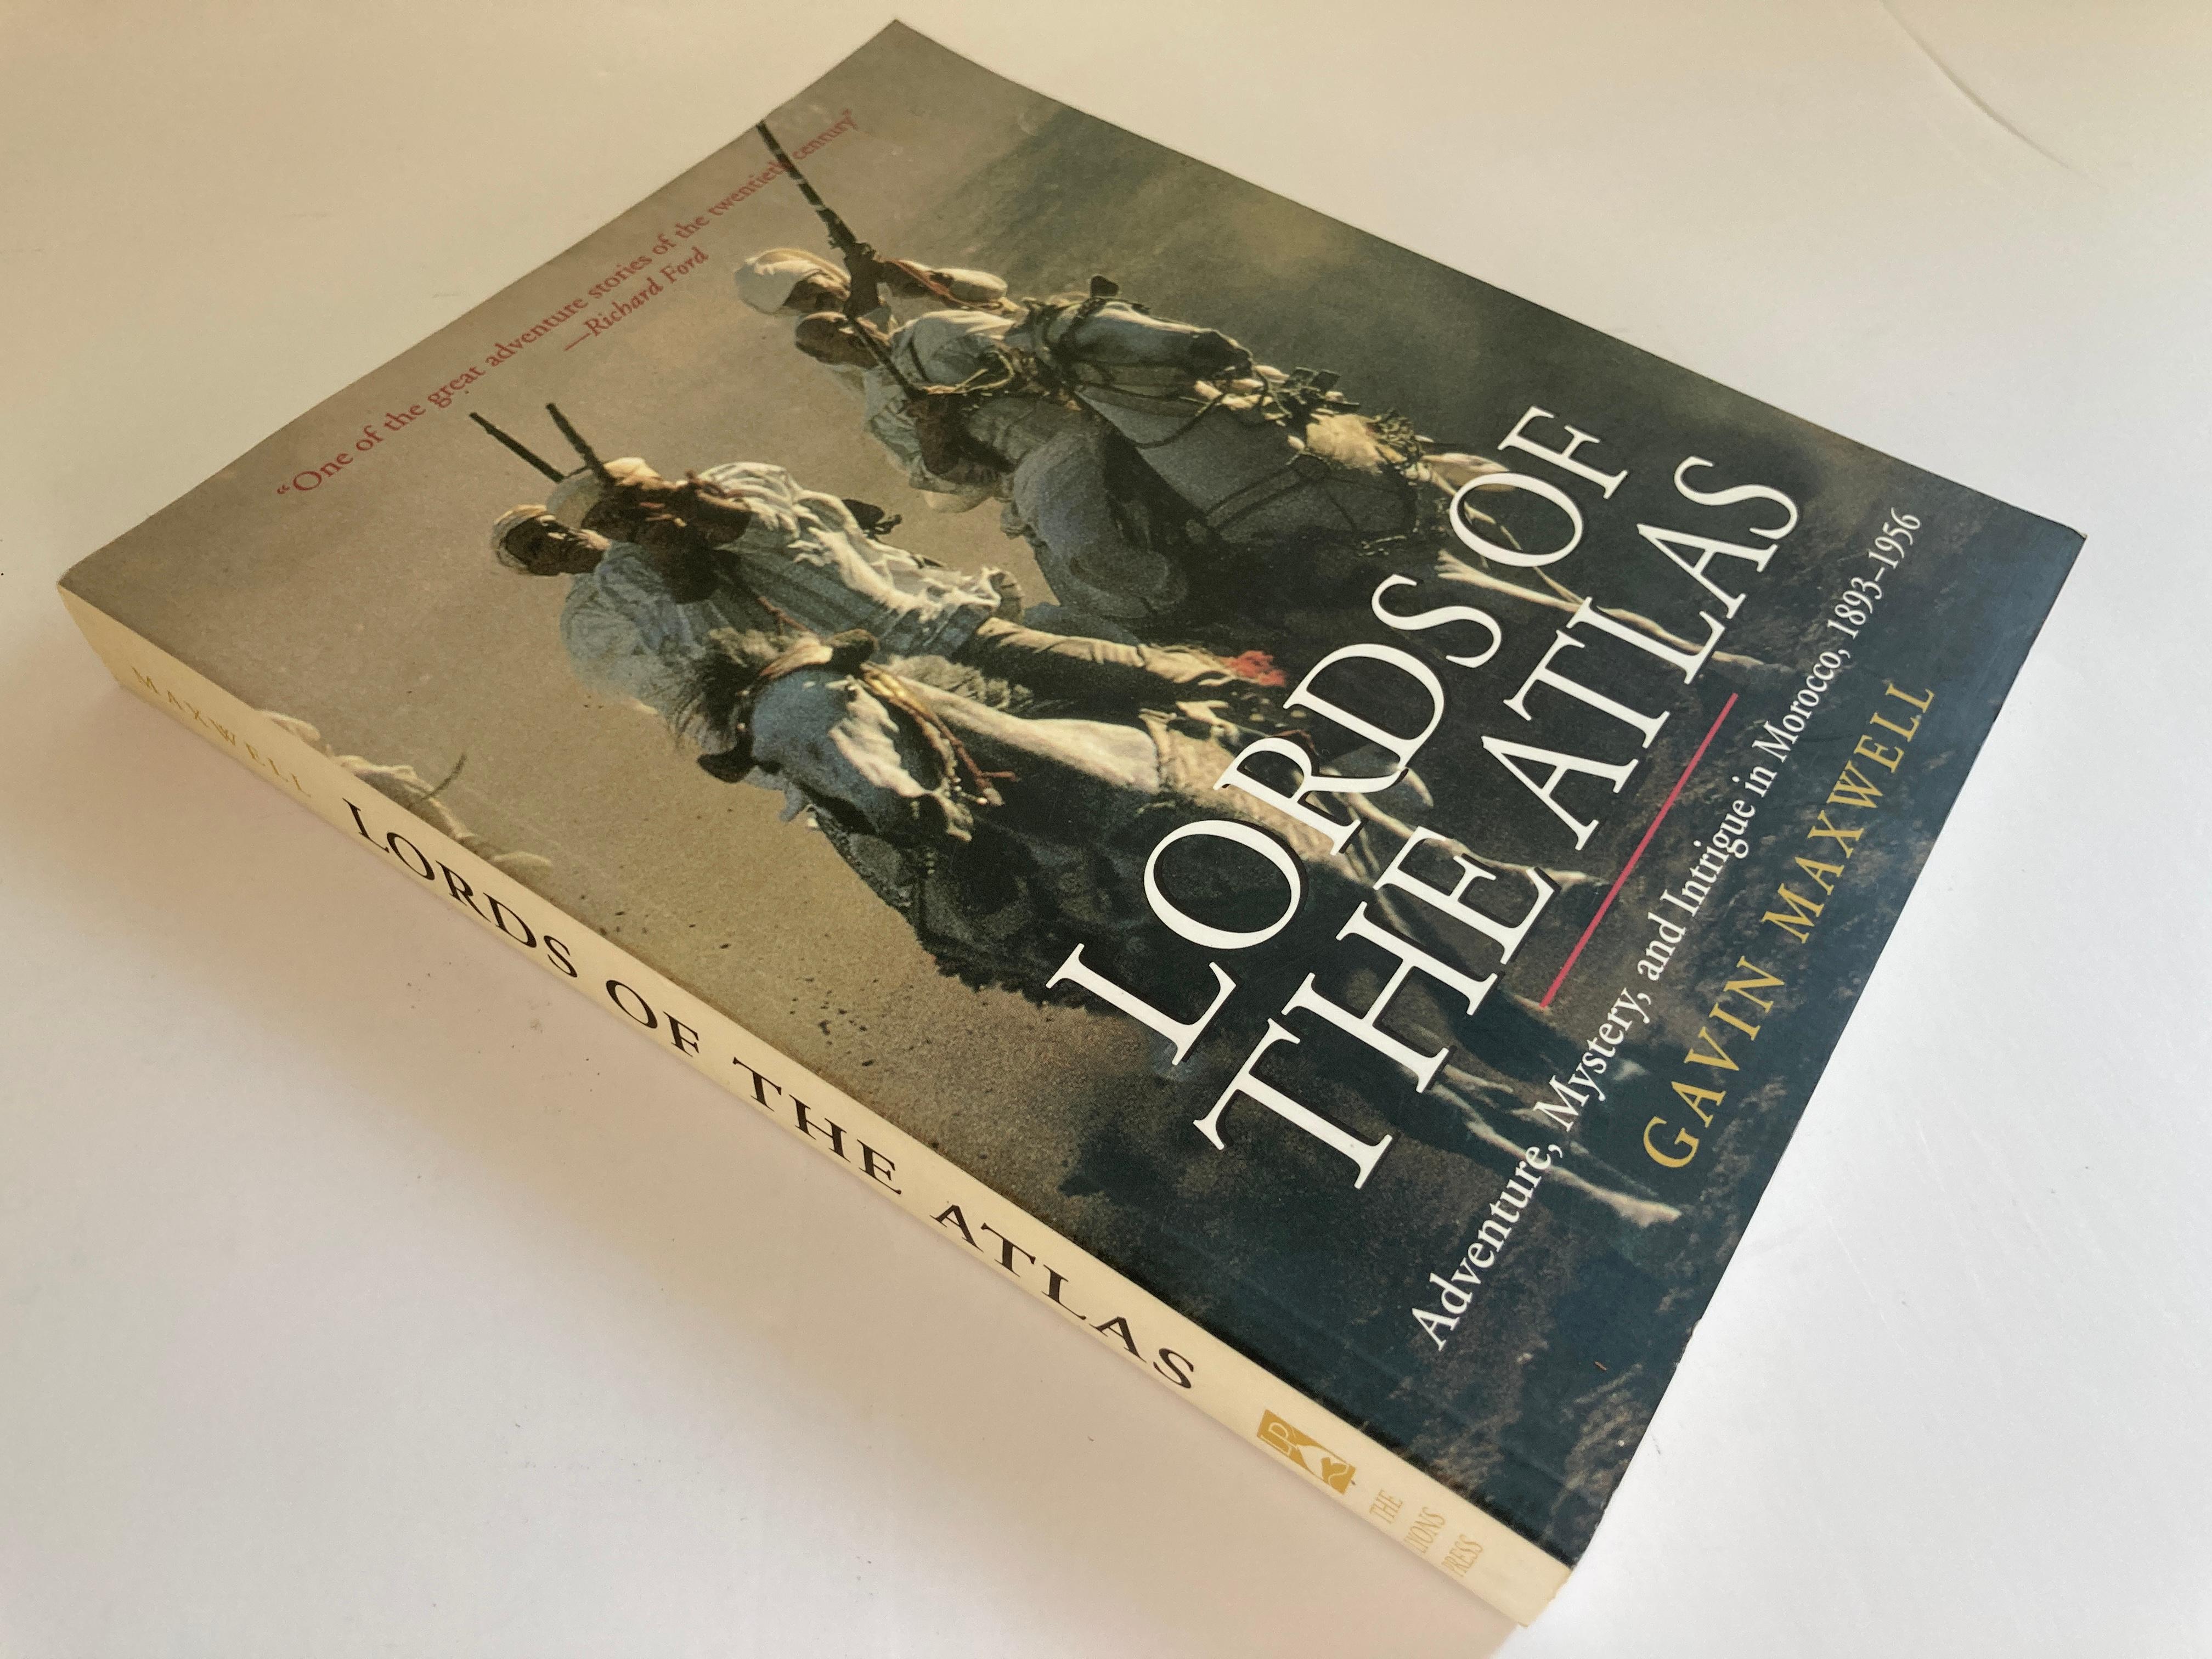 Lords of the Atlas: The Rise and Fall of the House of Glaoua, 1893-1956.
Gavin Maxwell
Dutton, 1966 - France - 318 pages.
A dramatic history of intrigue and action in Morocco during the rise and spectacular fall of the House of Glaoua; with color